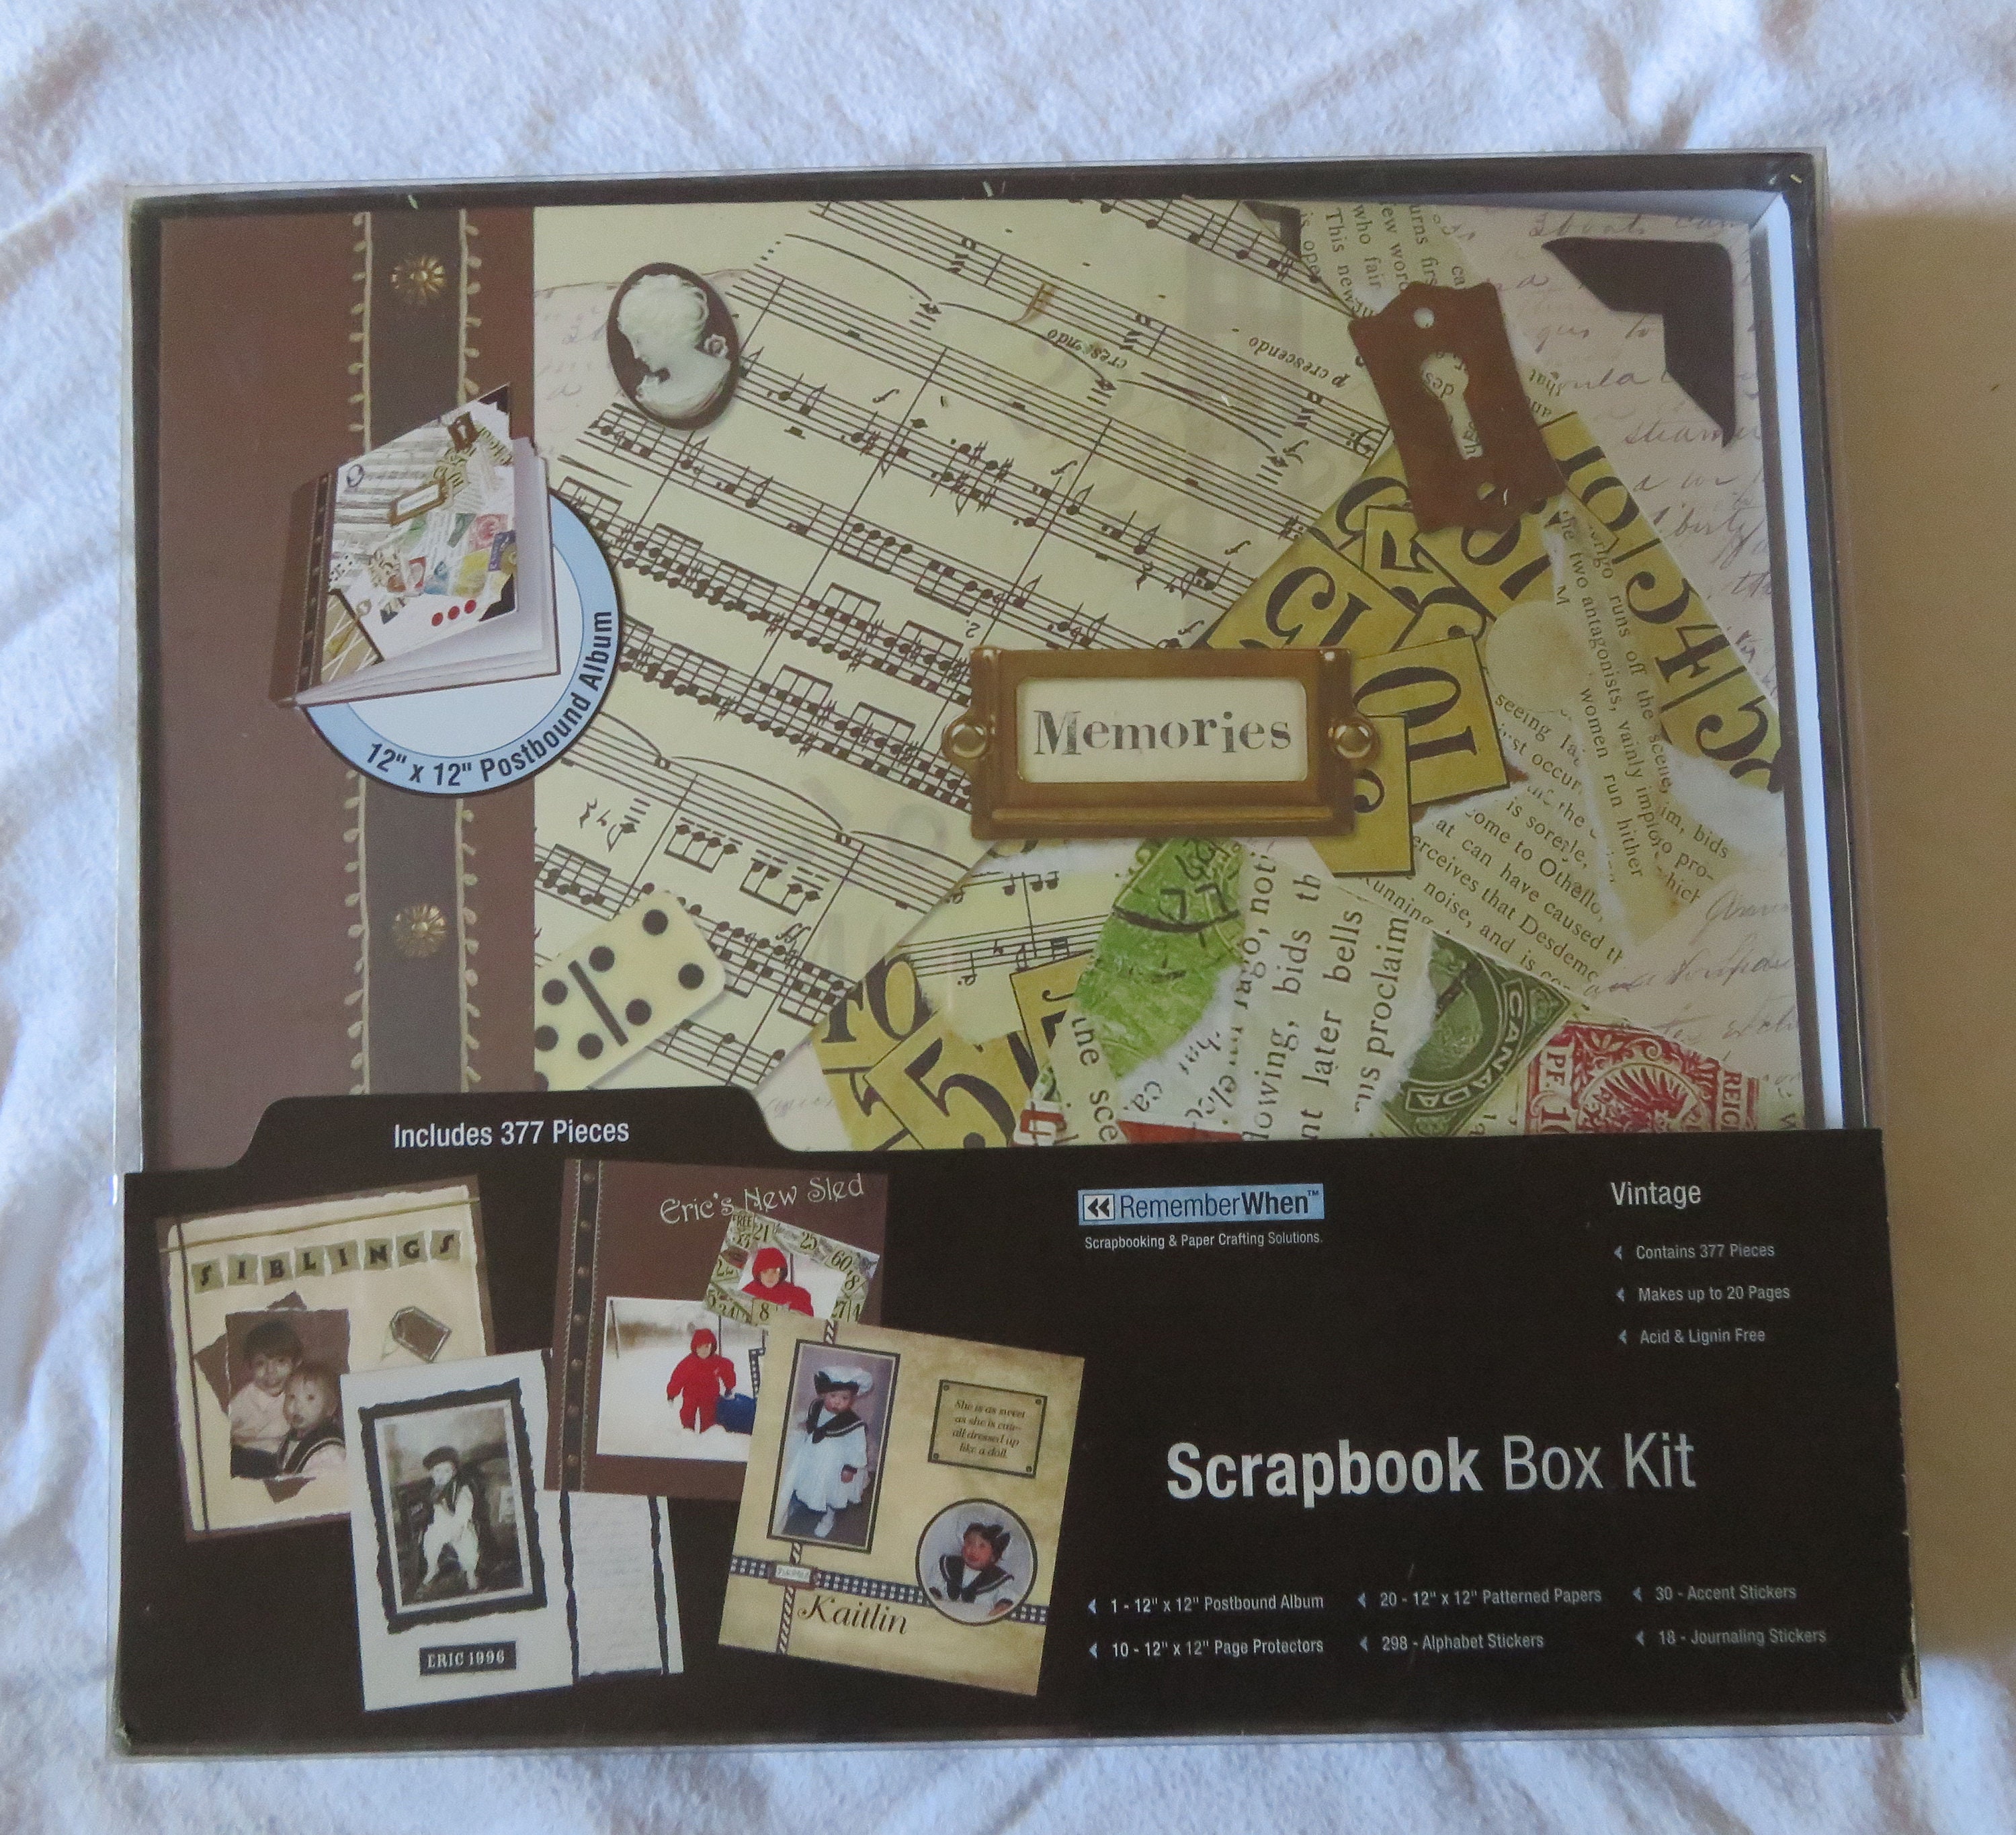 Colorbok Scrapbook Box Kit All Occasions